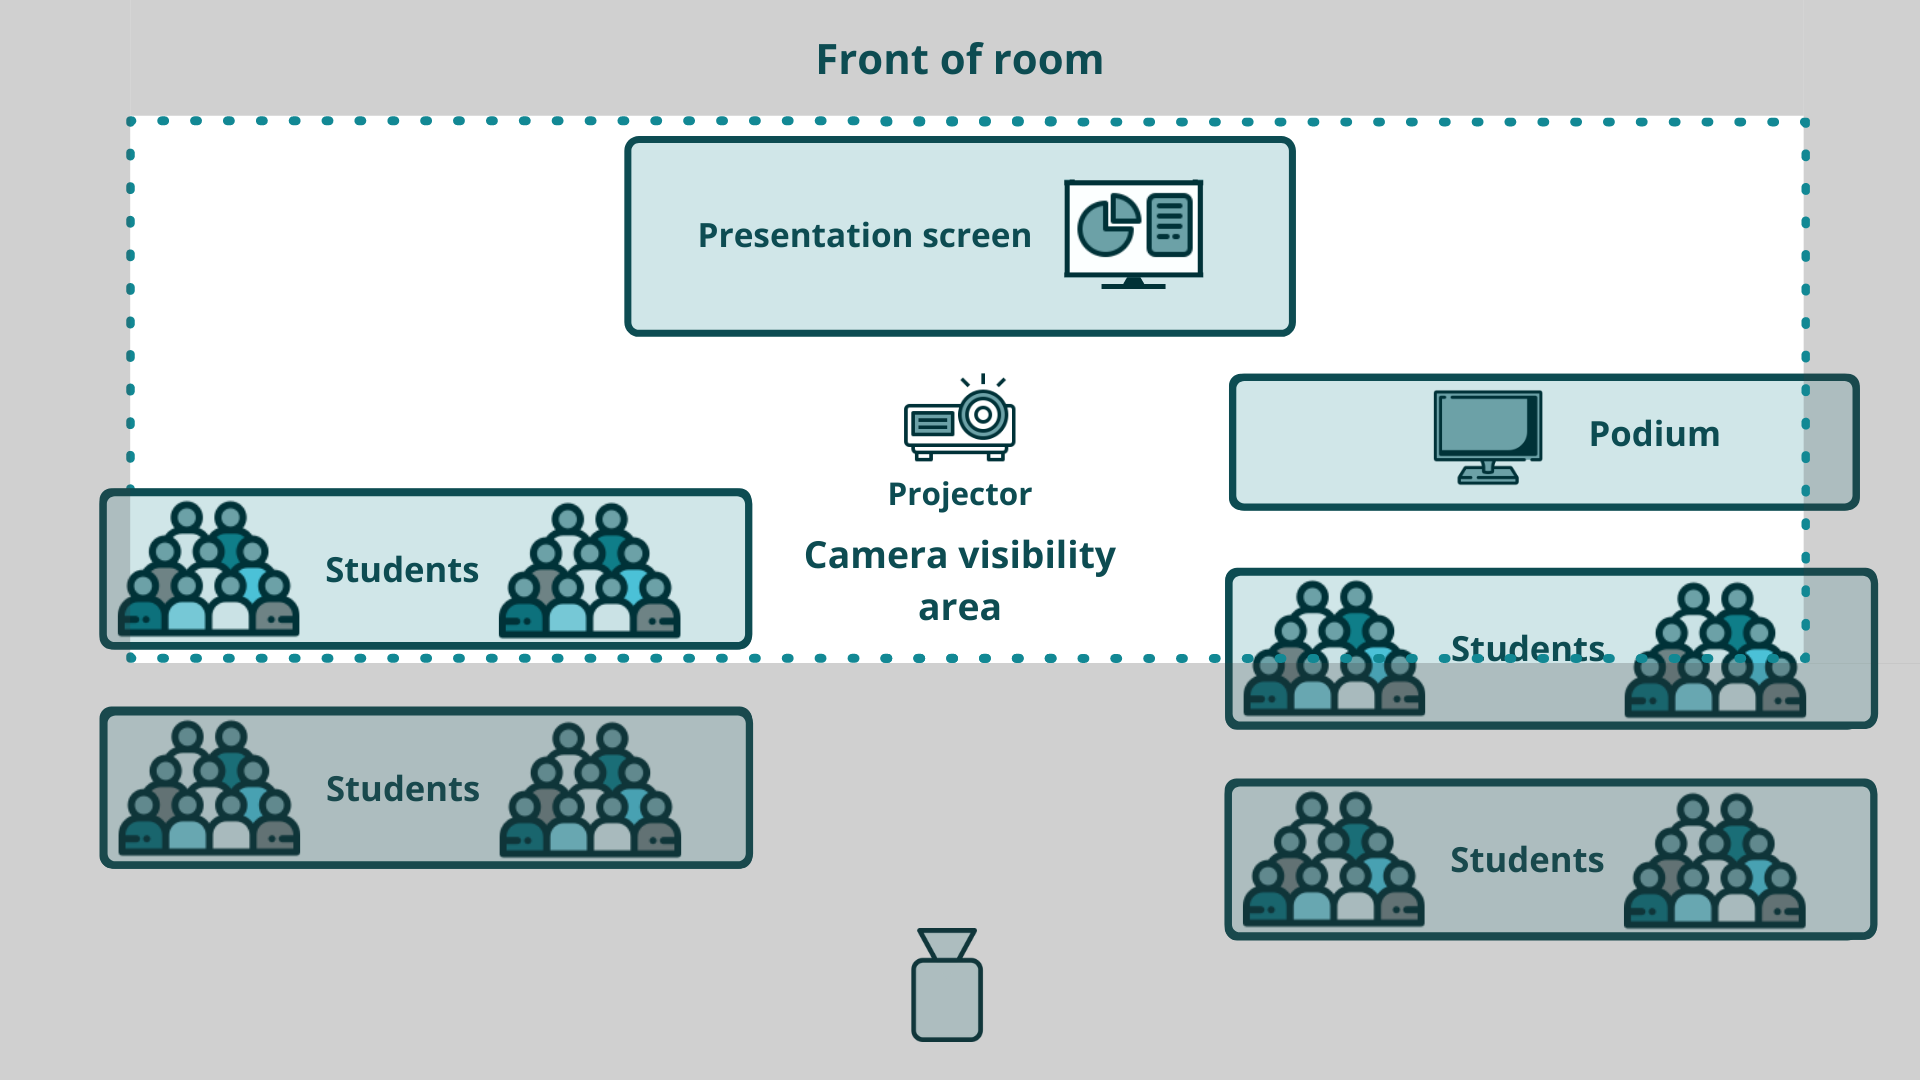 Diagram of a Zoom+ Room with an overlaid rectangle illustrating the visibility area of the camera, which is approximately 30% of the room from front of classroom.